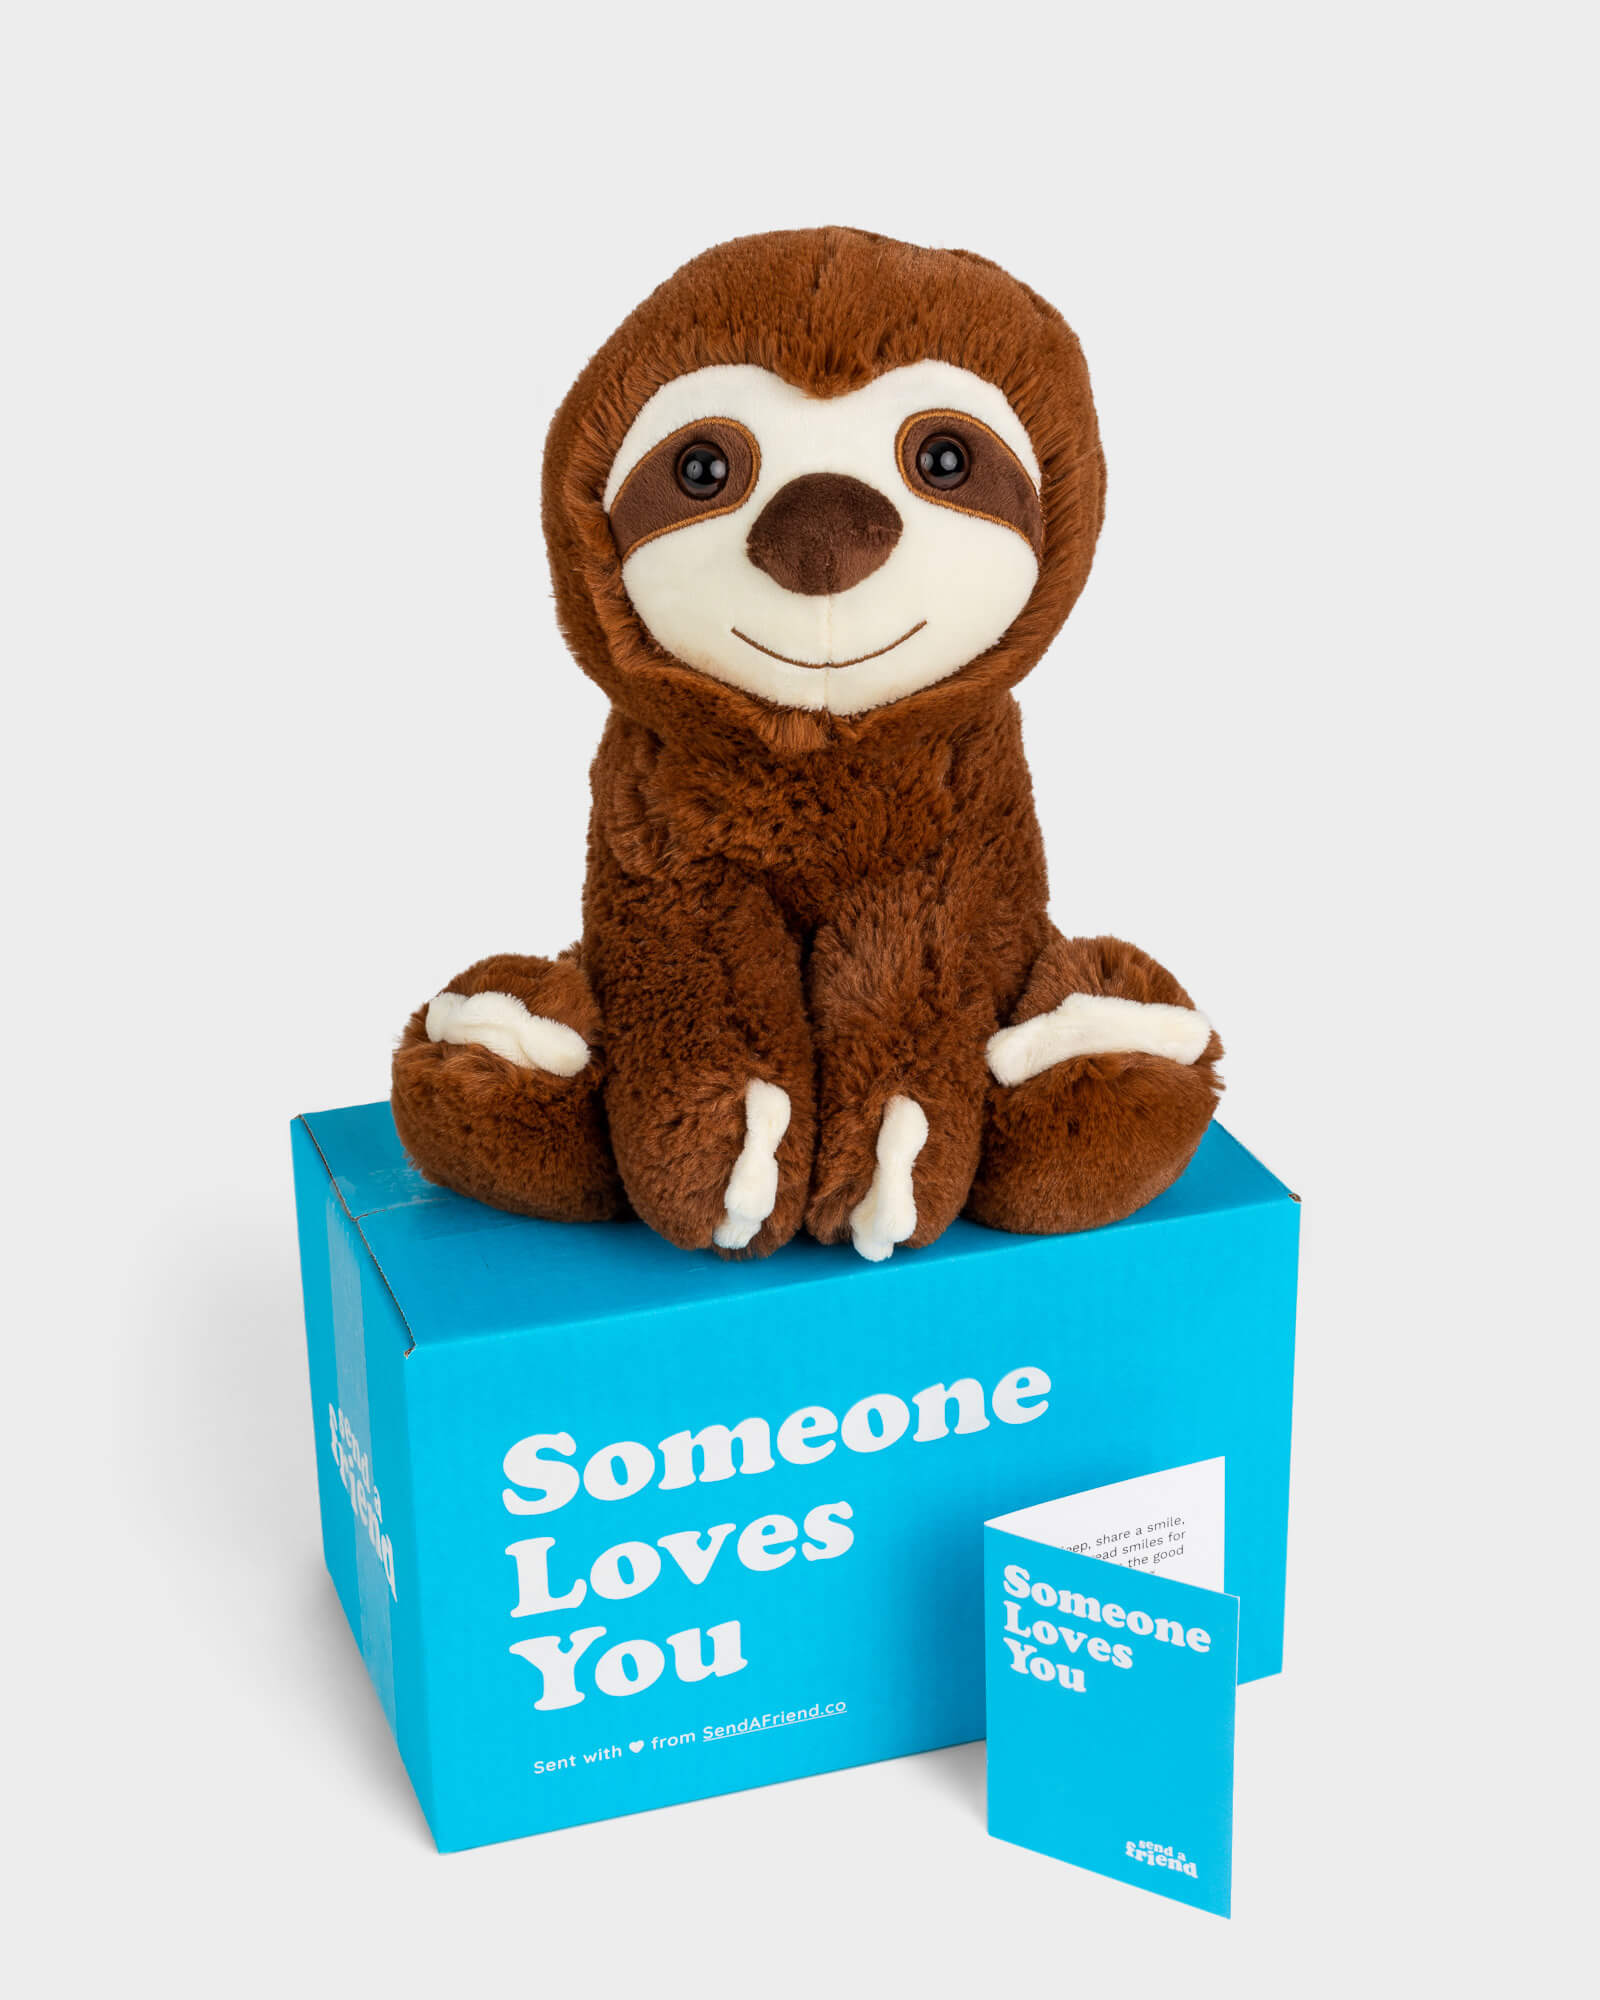 The Sloth Stuffed Animal Care Package